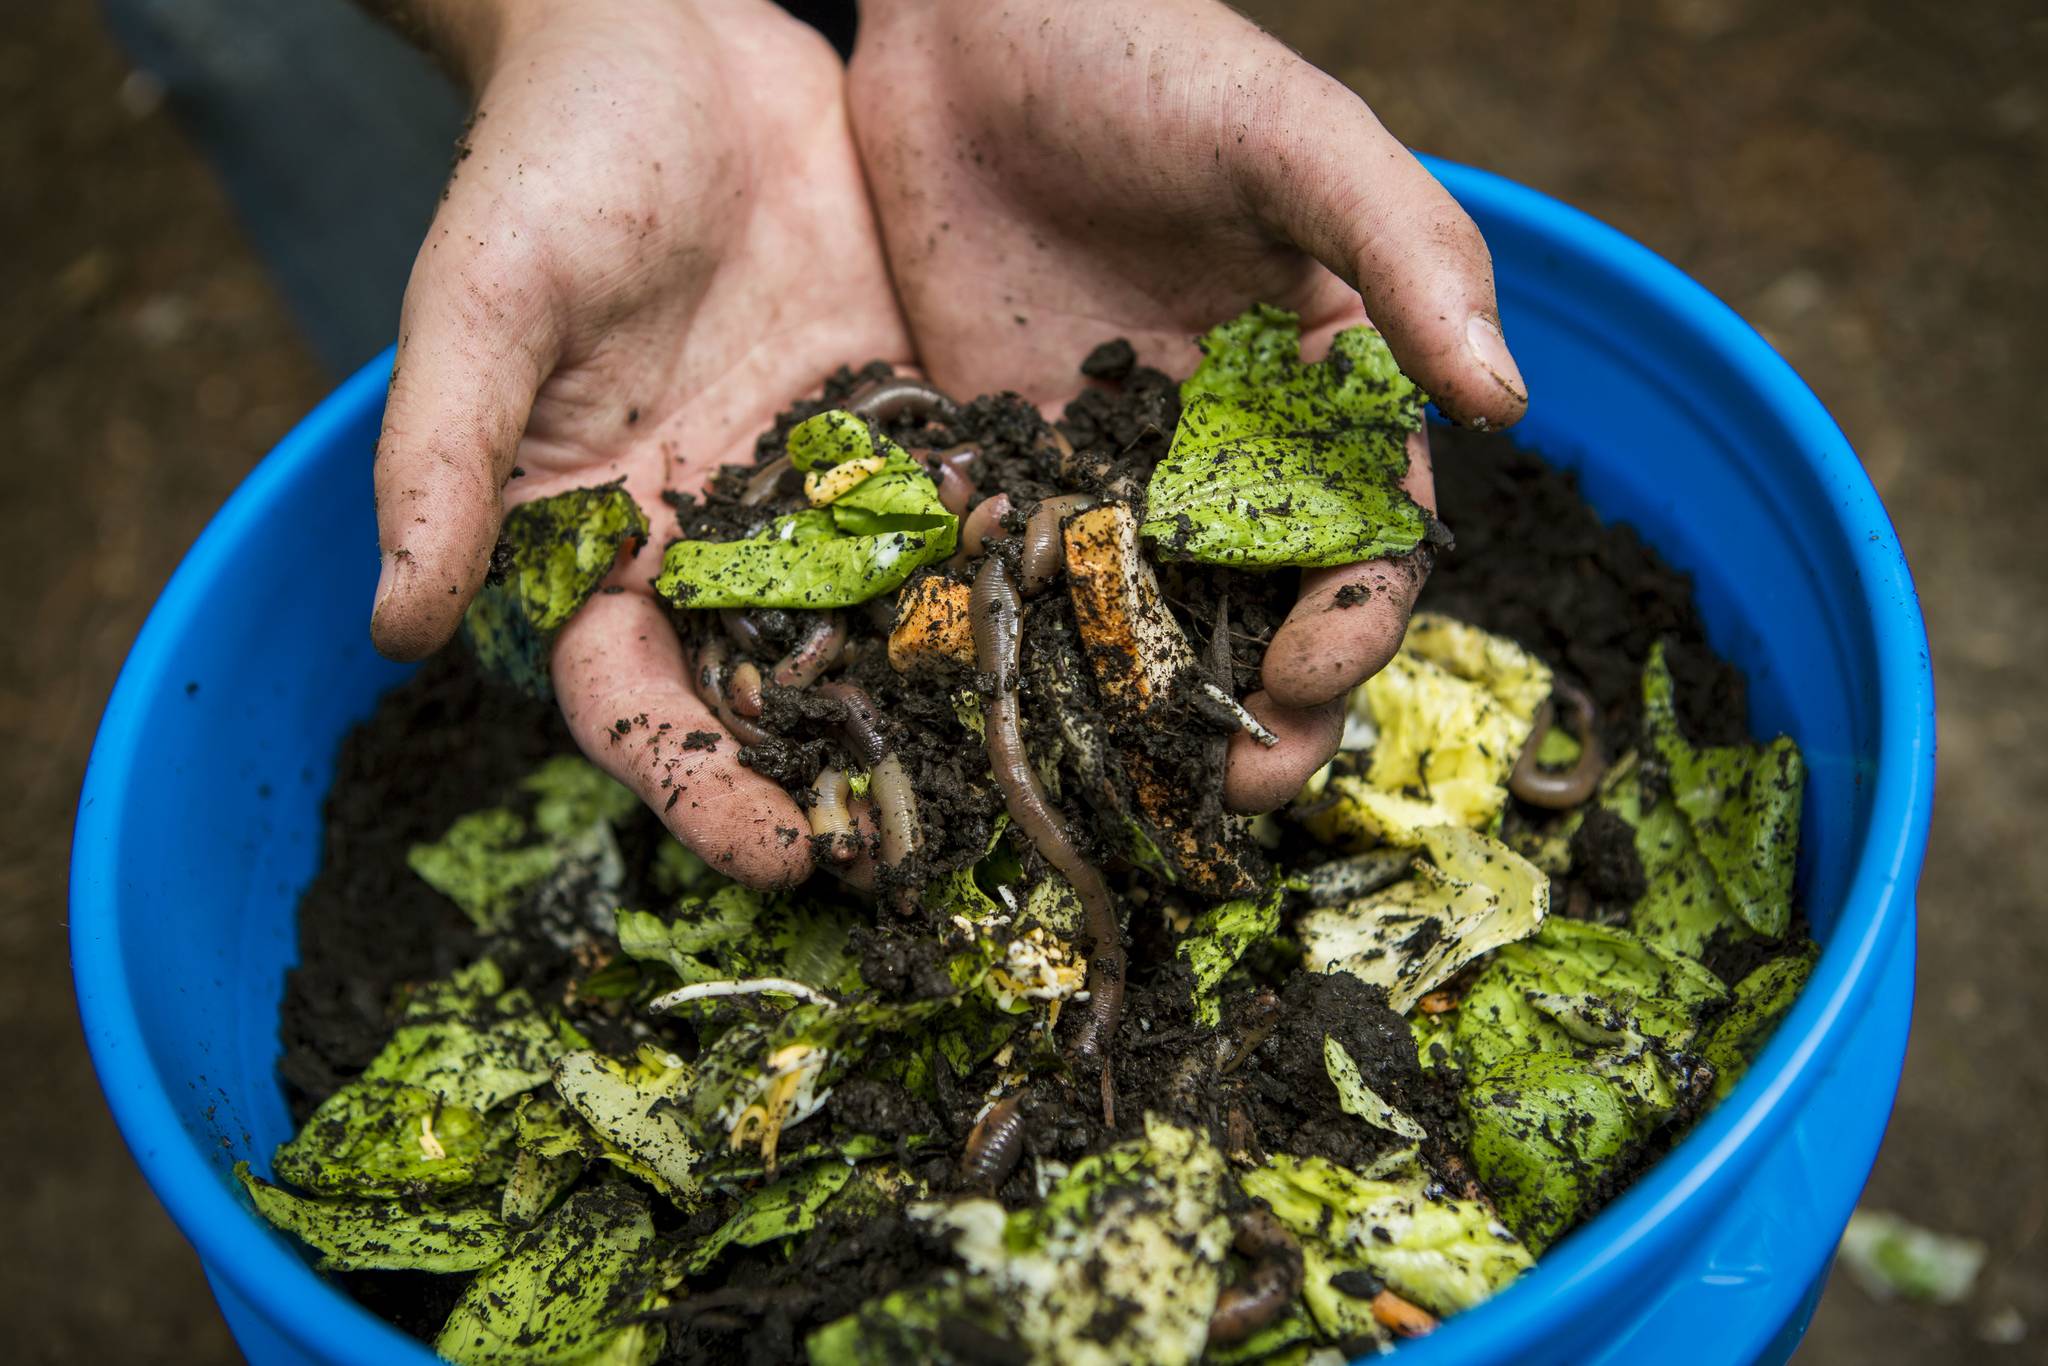 Compost Works lets you virtually compost